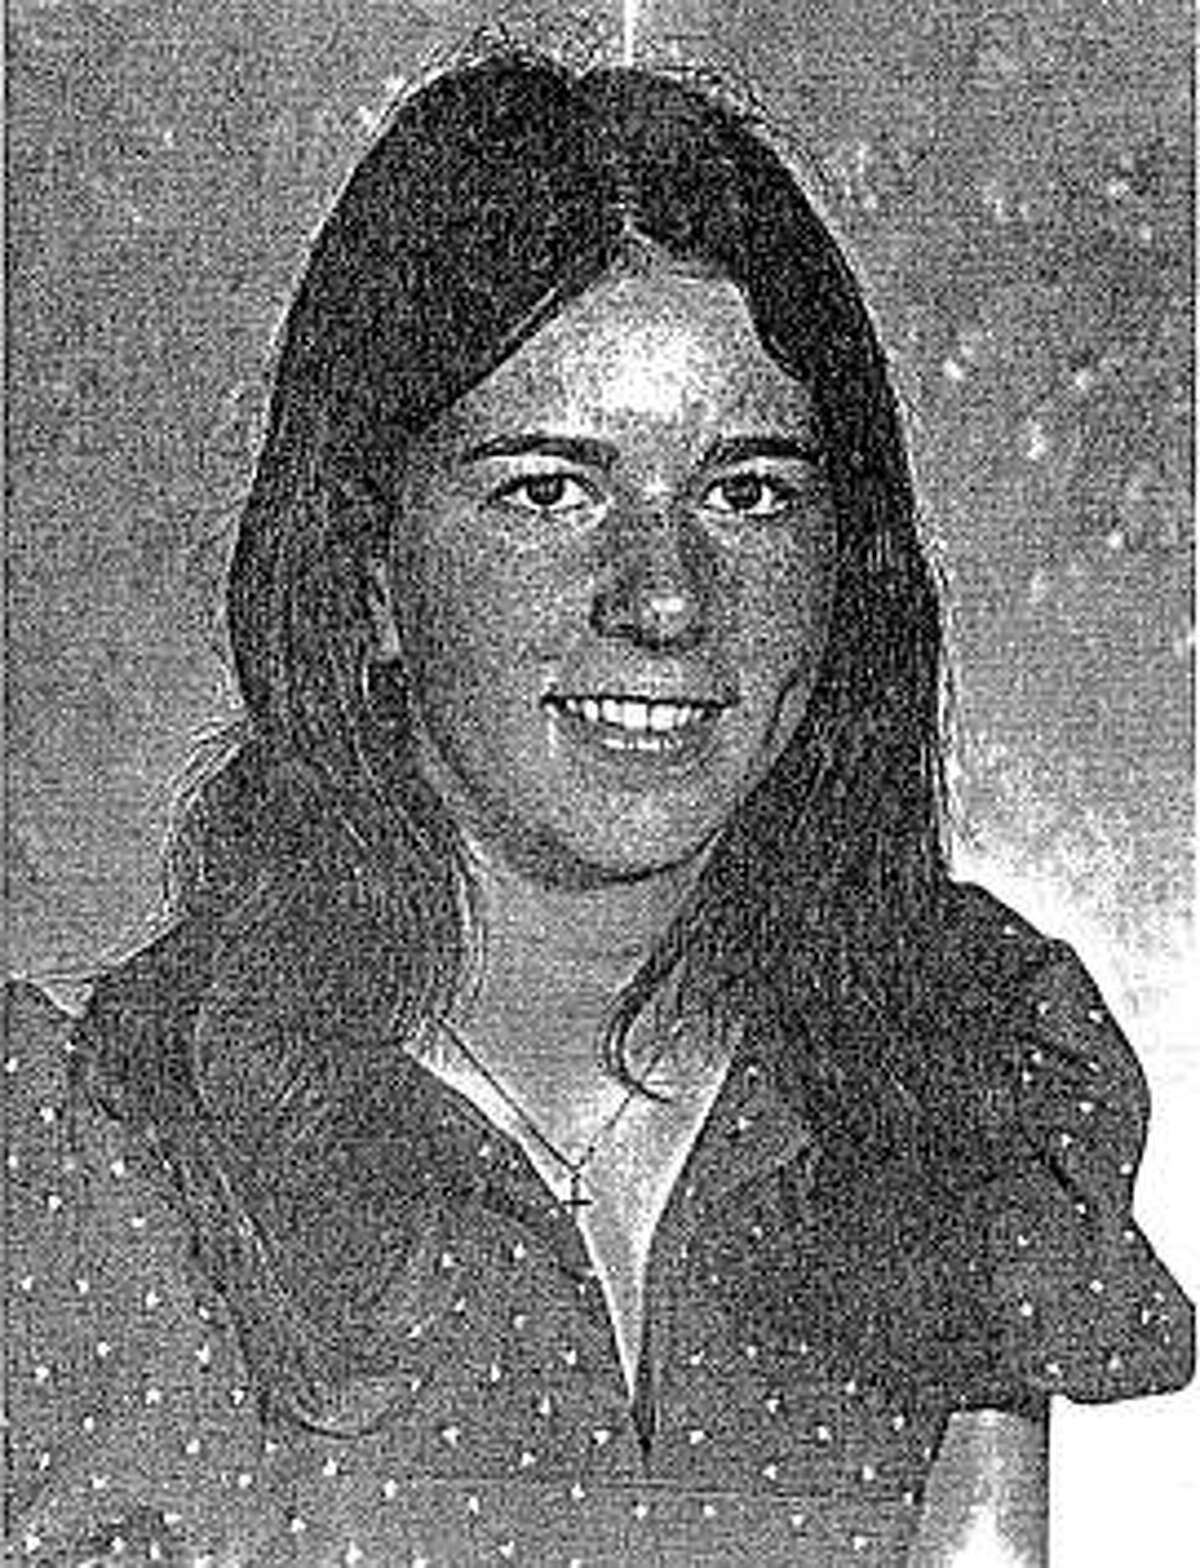 Paula Baxter’s body was found behind a church in her hometown of Millbrae on Feb. 6, 1976.